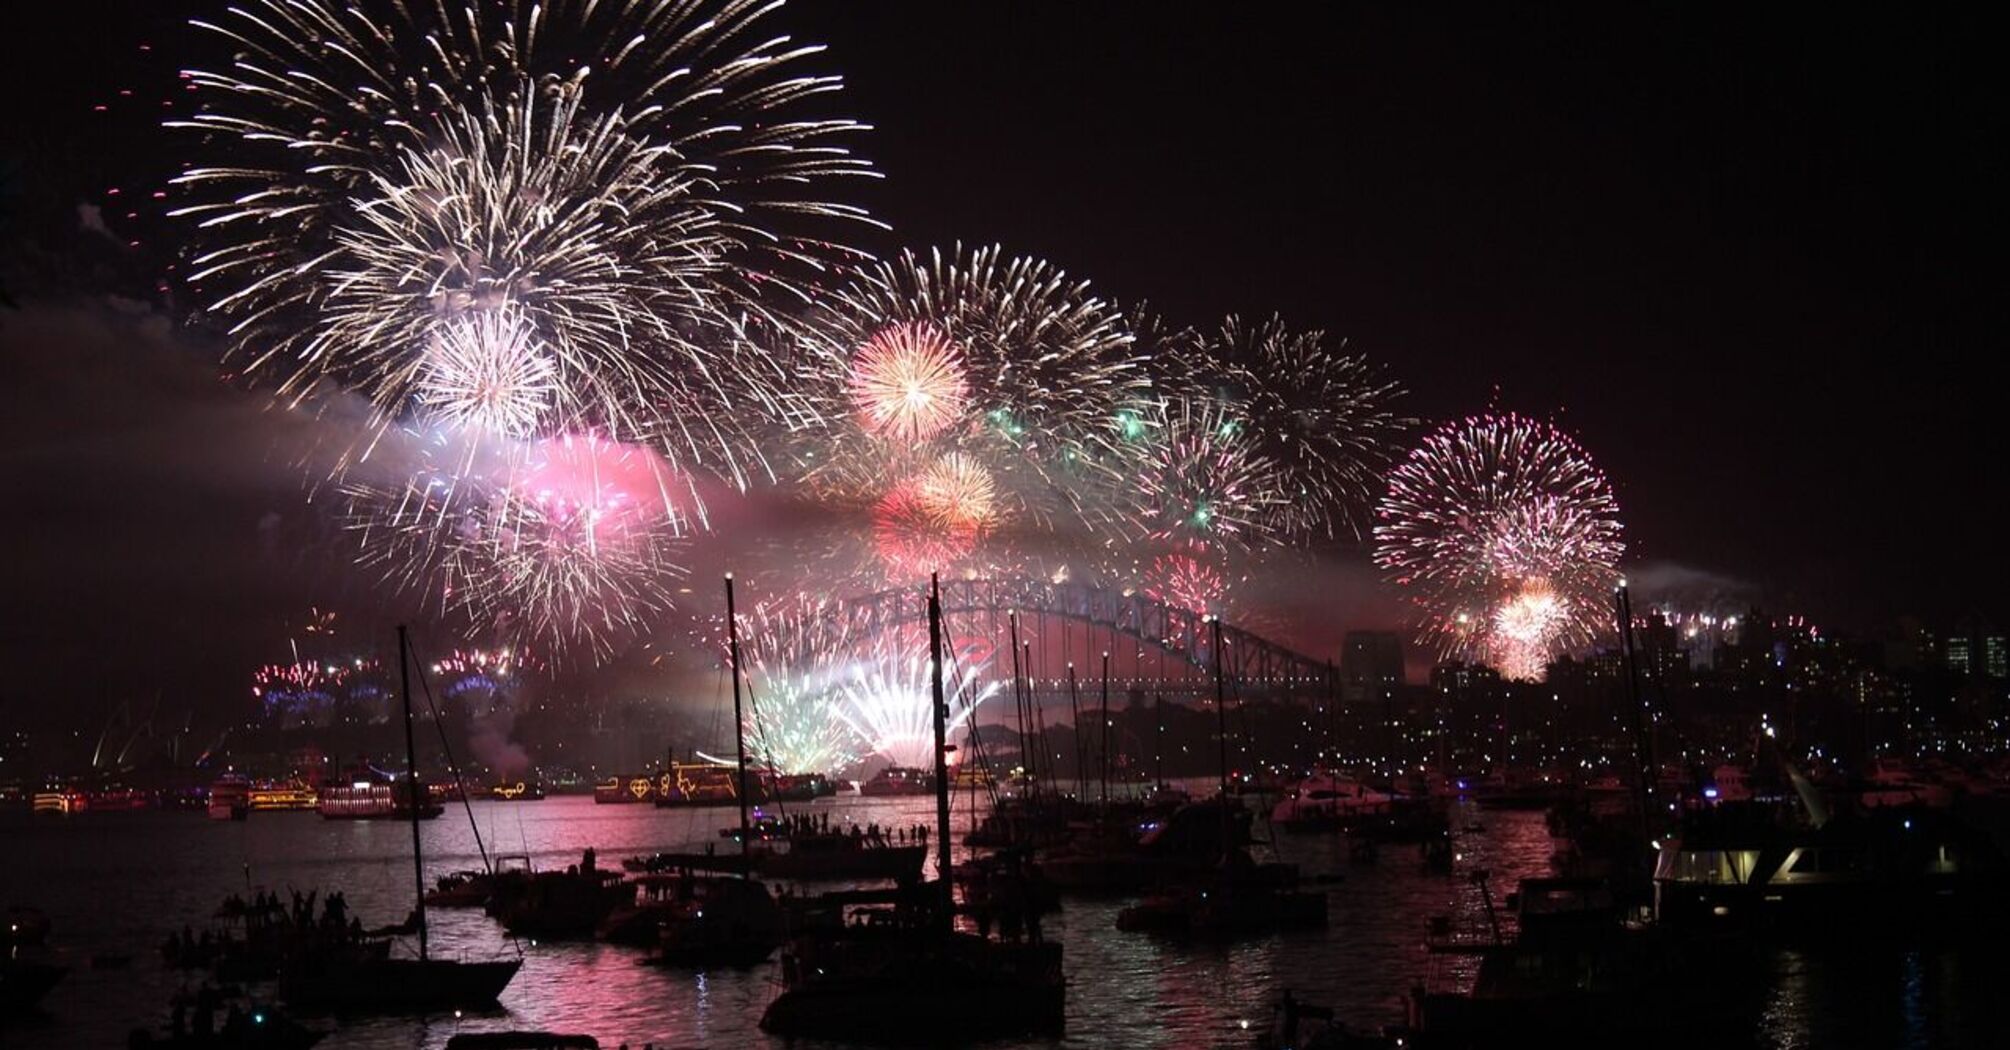 Sydney was named the "New Year's Capital of the World" for its amazing fireworks show. How it looked like